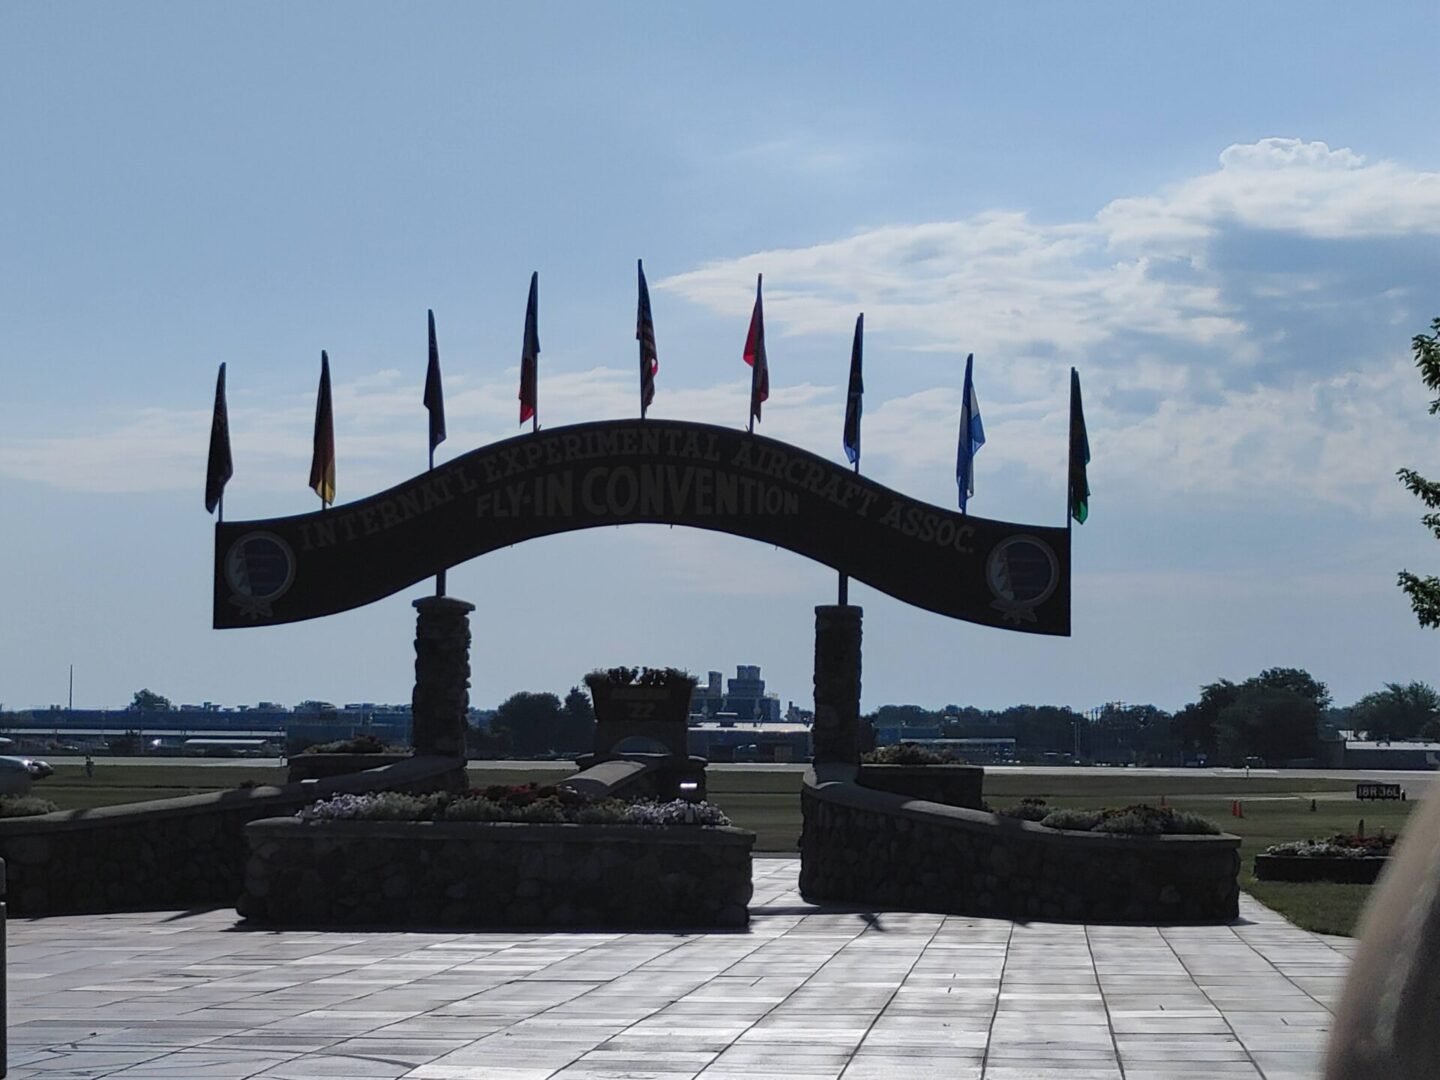 A large arch with flags on it